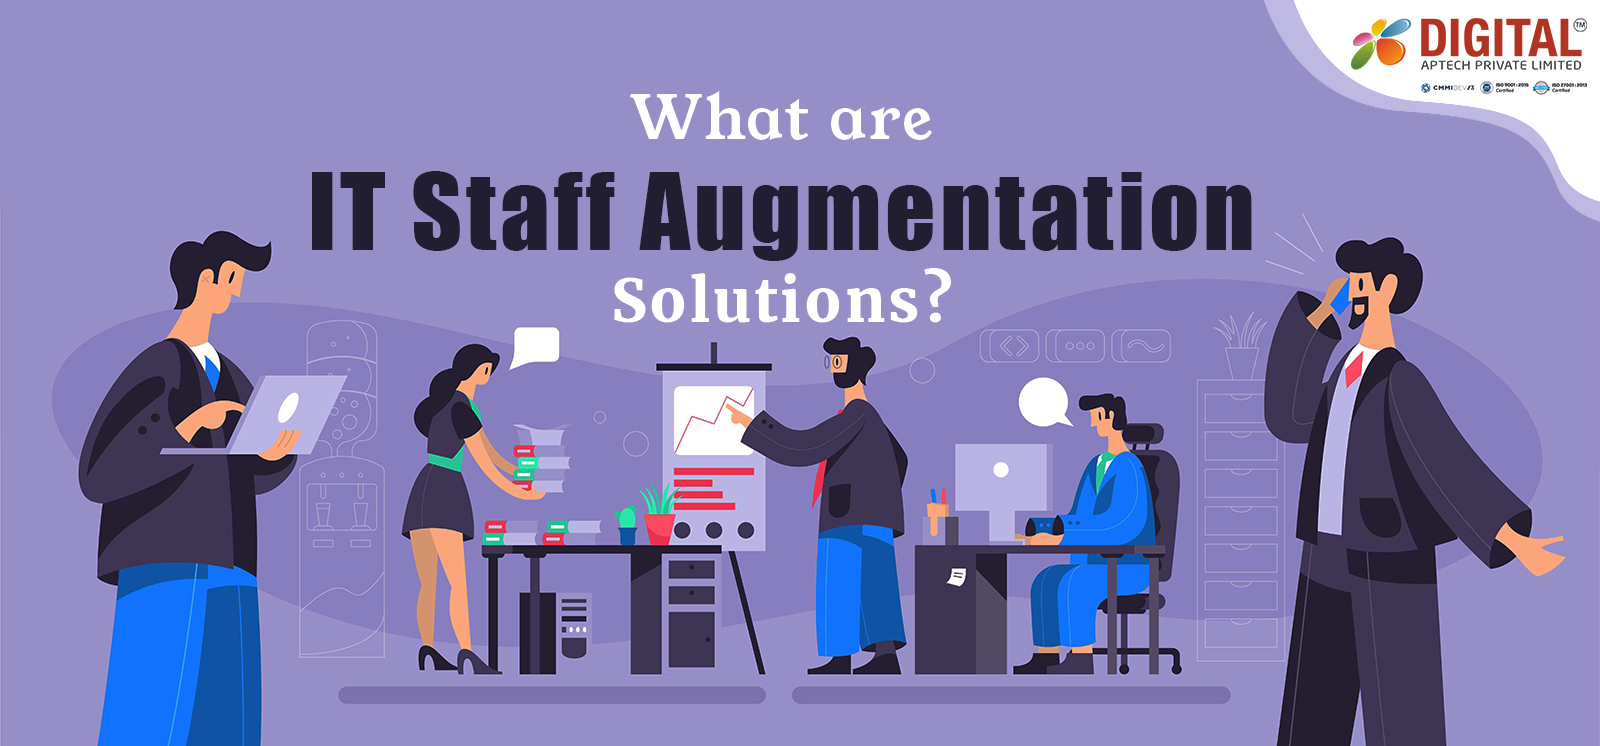 What are IT Staff Augmentation Solutions?